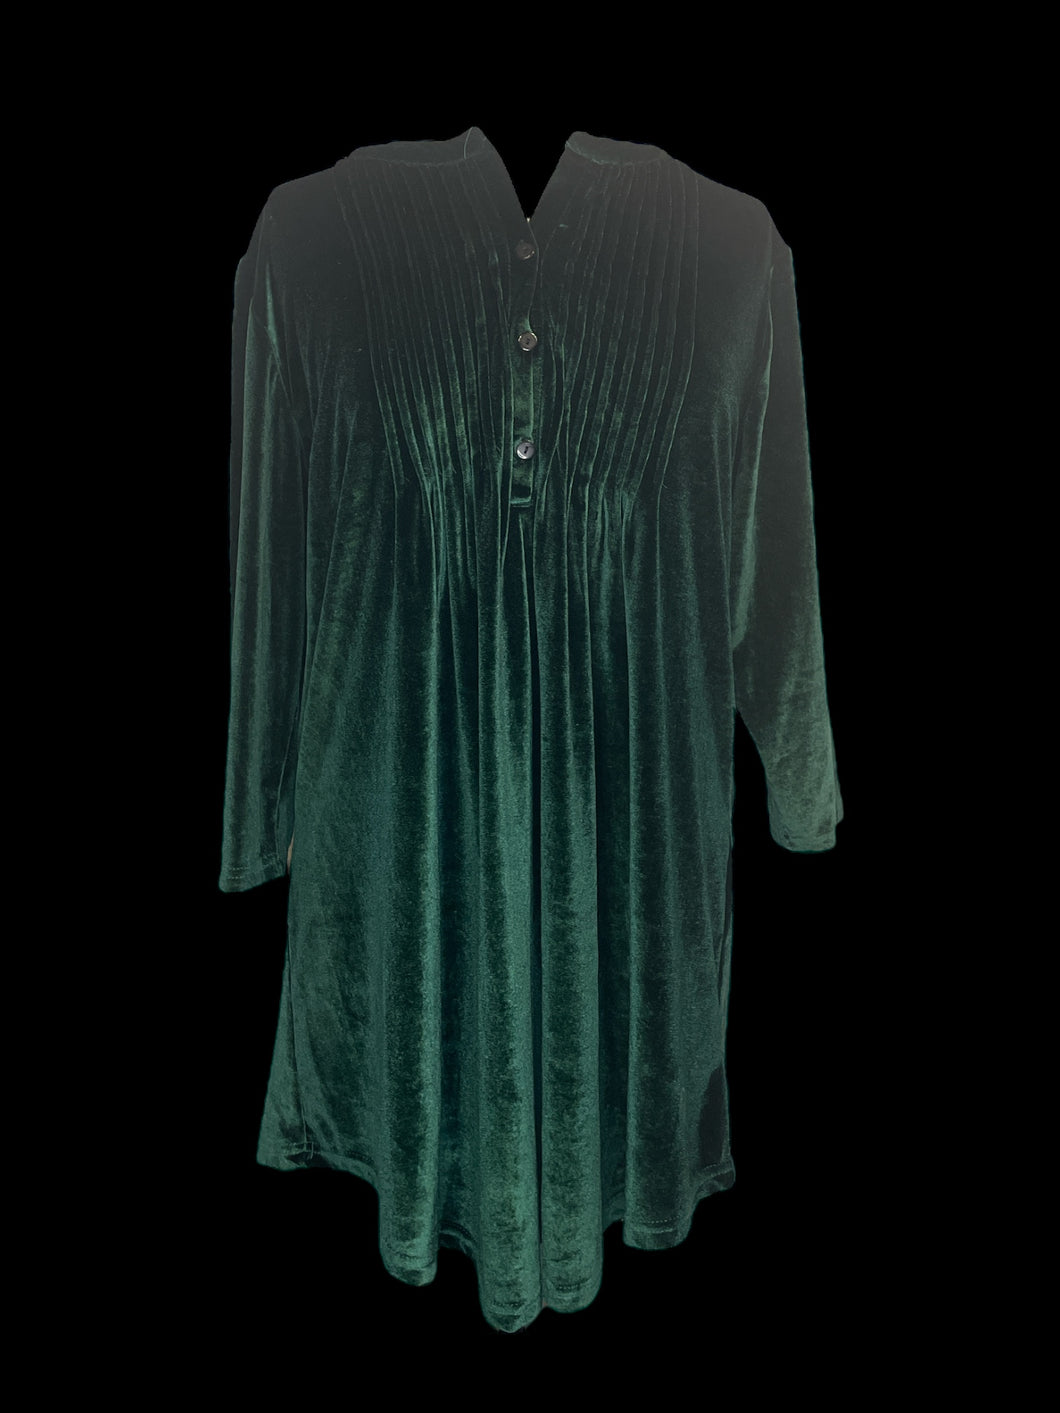 2X Green velvet 3/4 sleeve partial button top w/ pleating detail